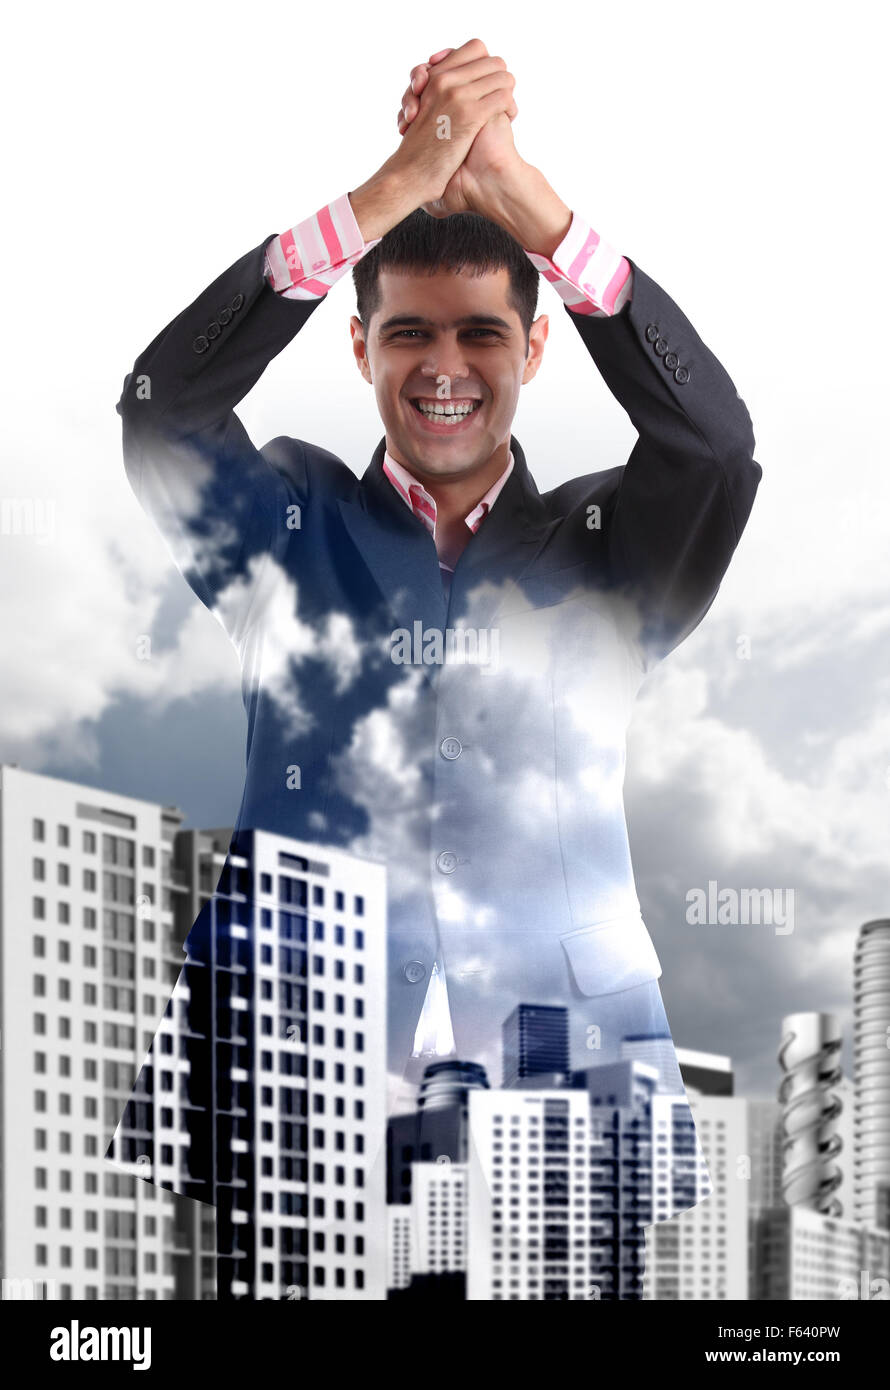 Young businessman enjoys victory Stock Photo